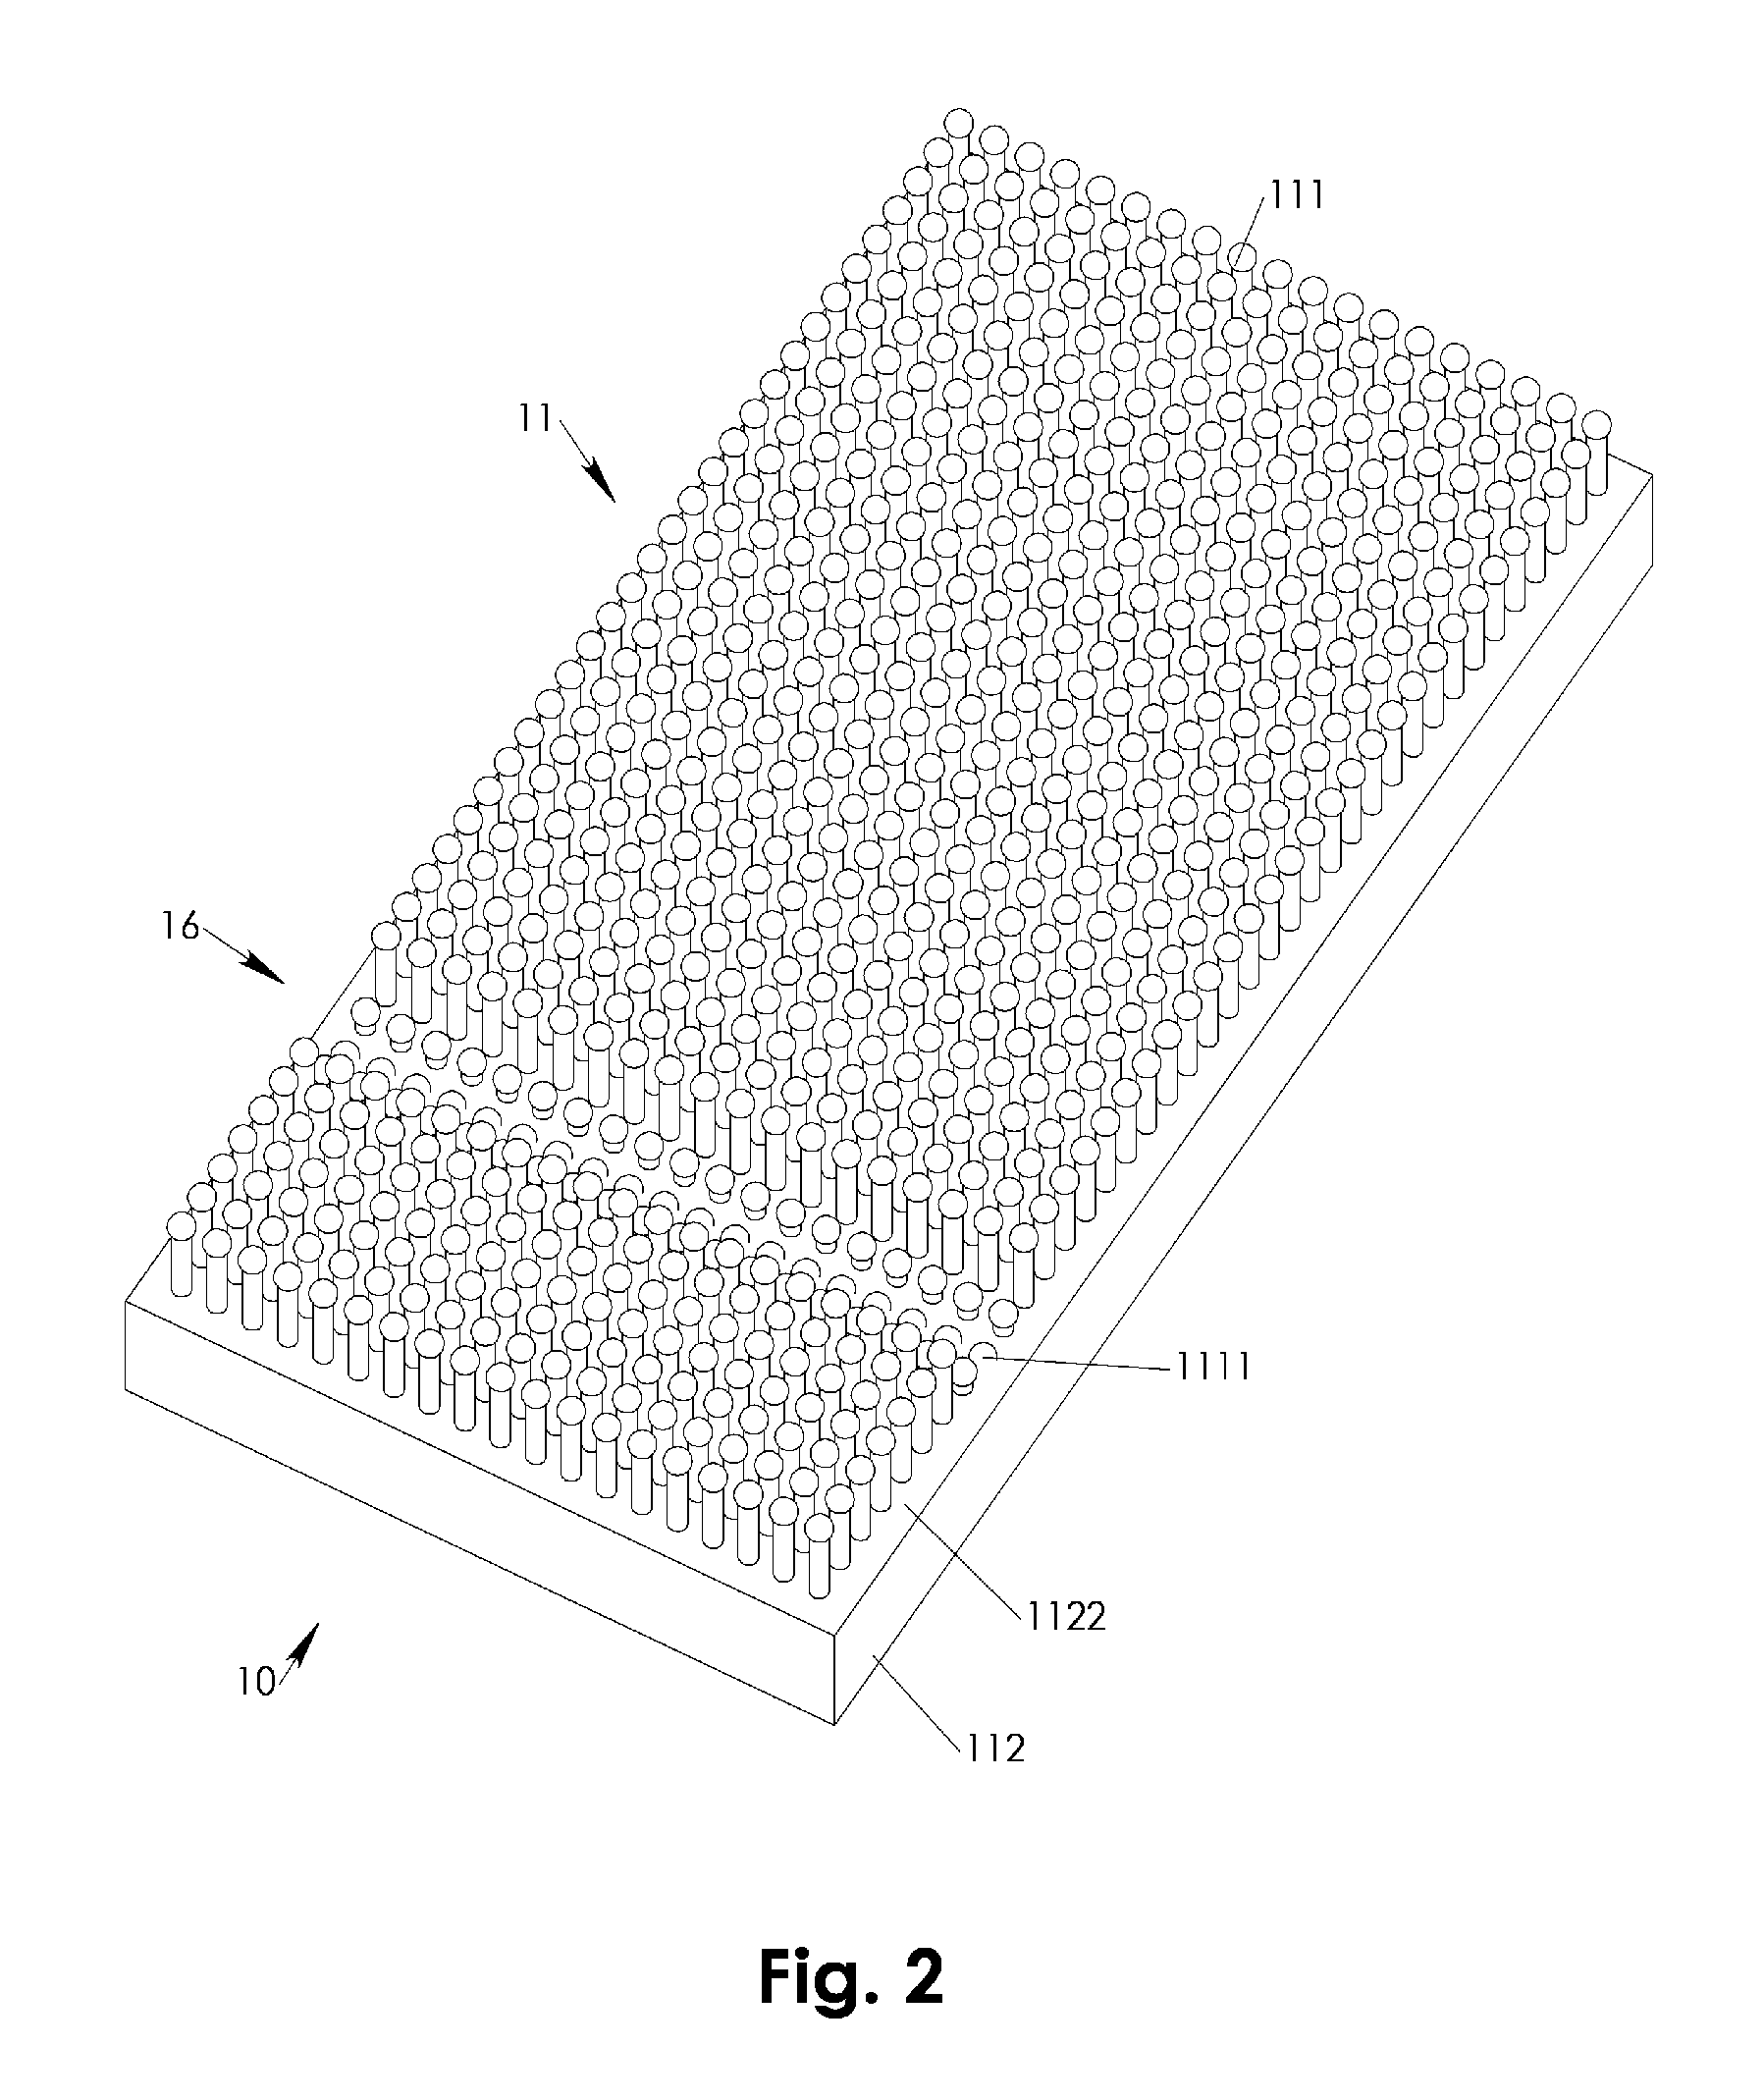 Patient bedding system with dense matrix or individually suspended directly body supporting pins